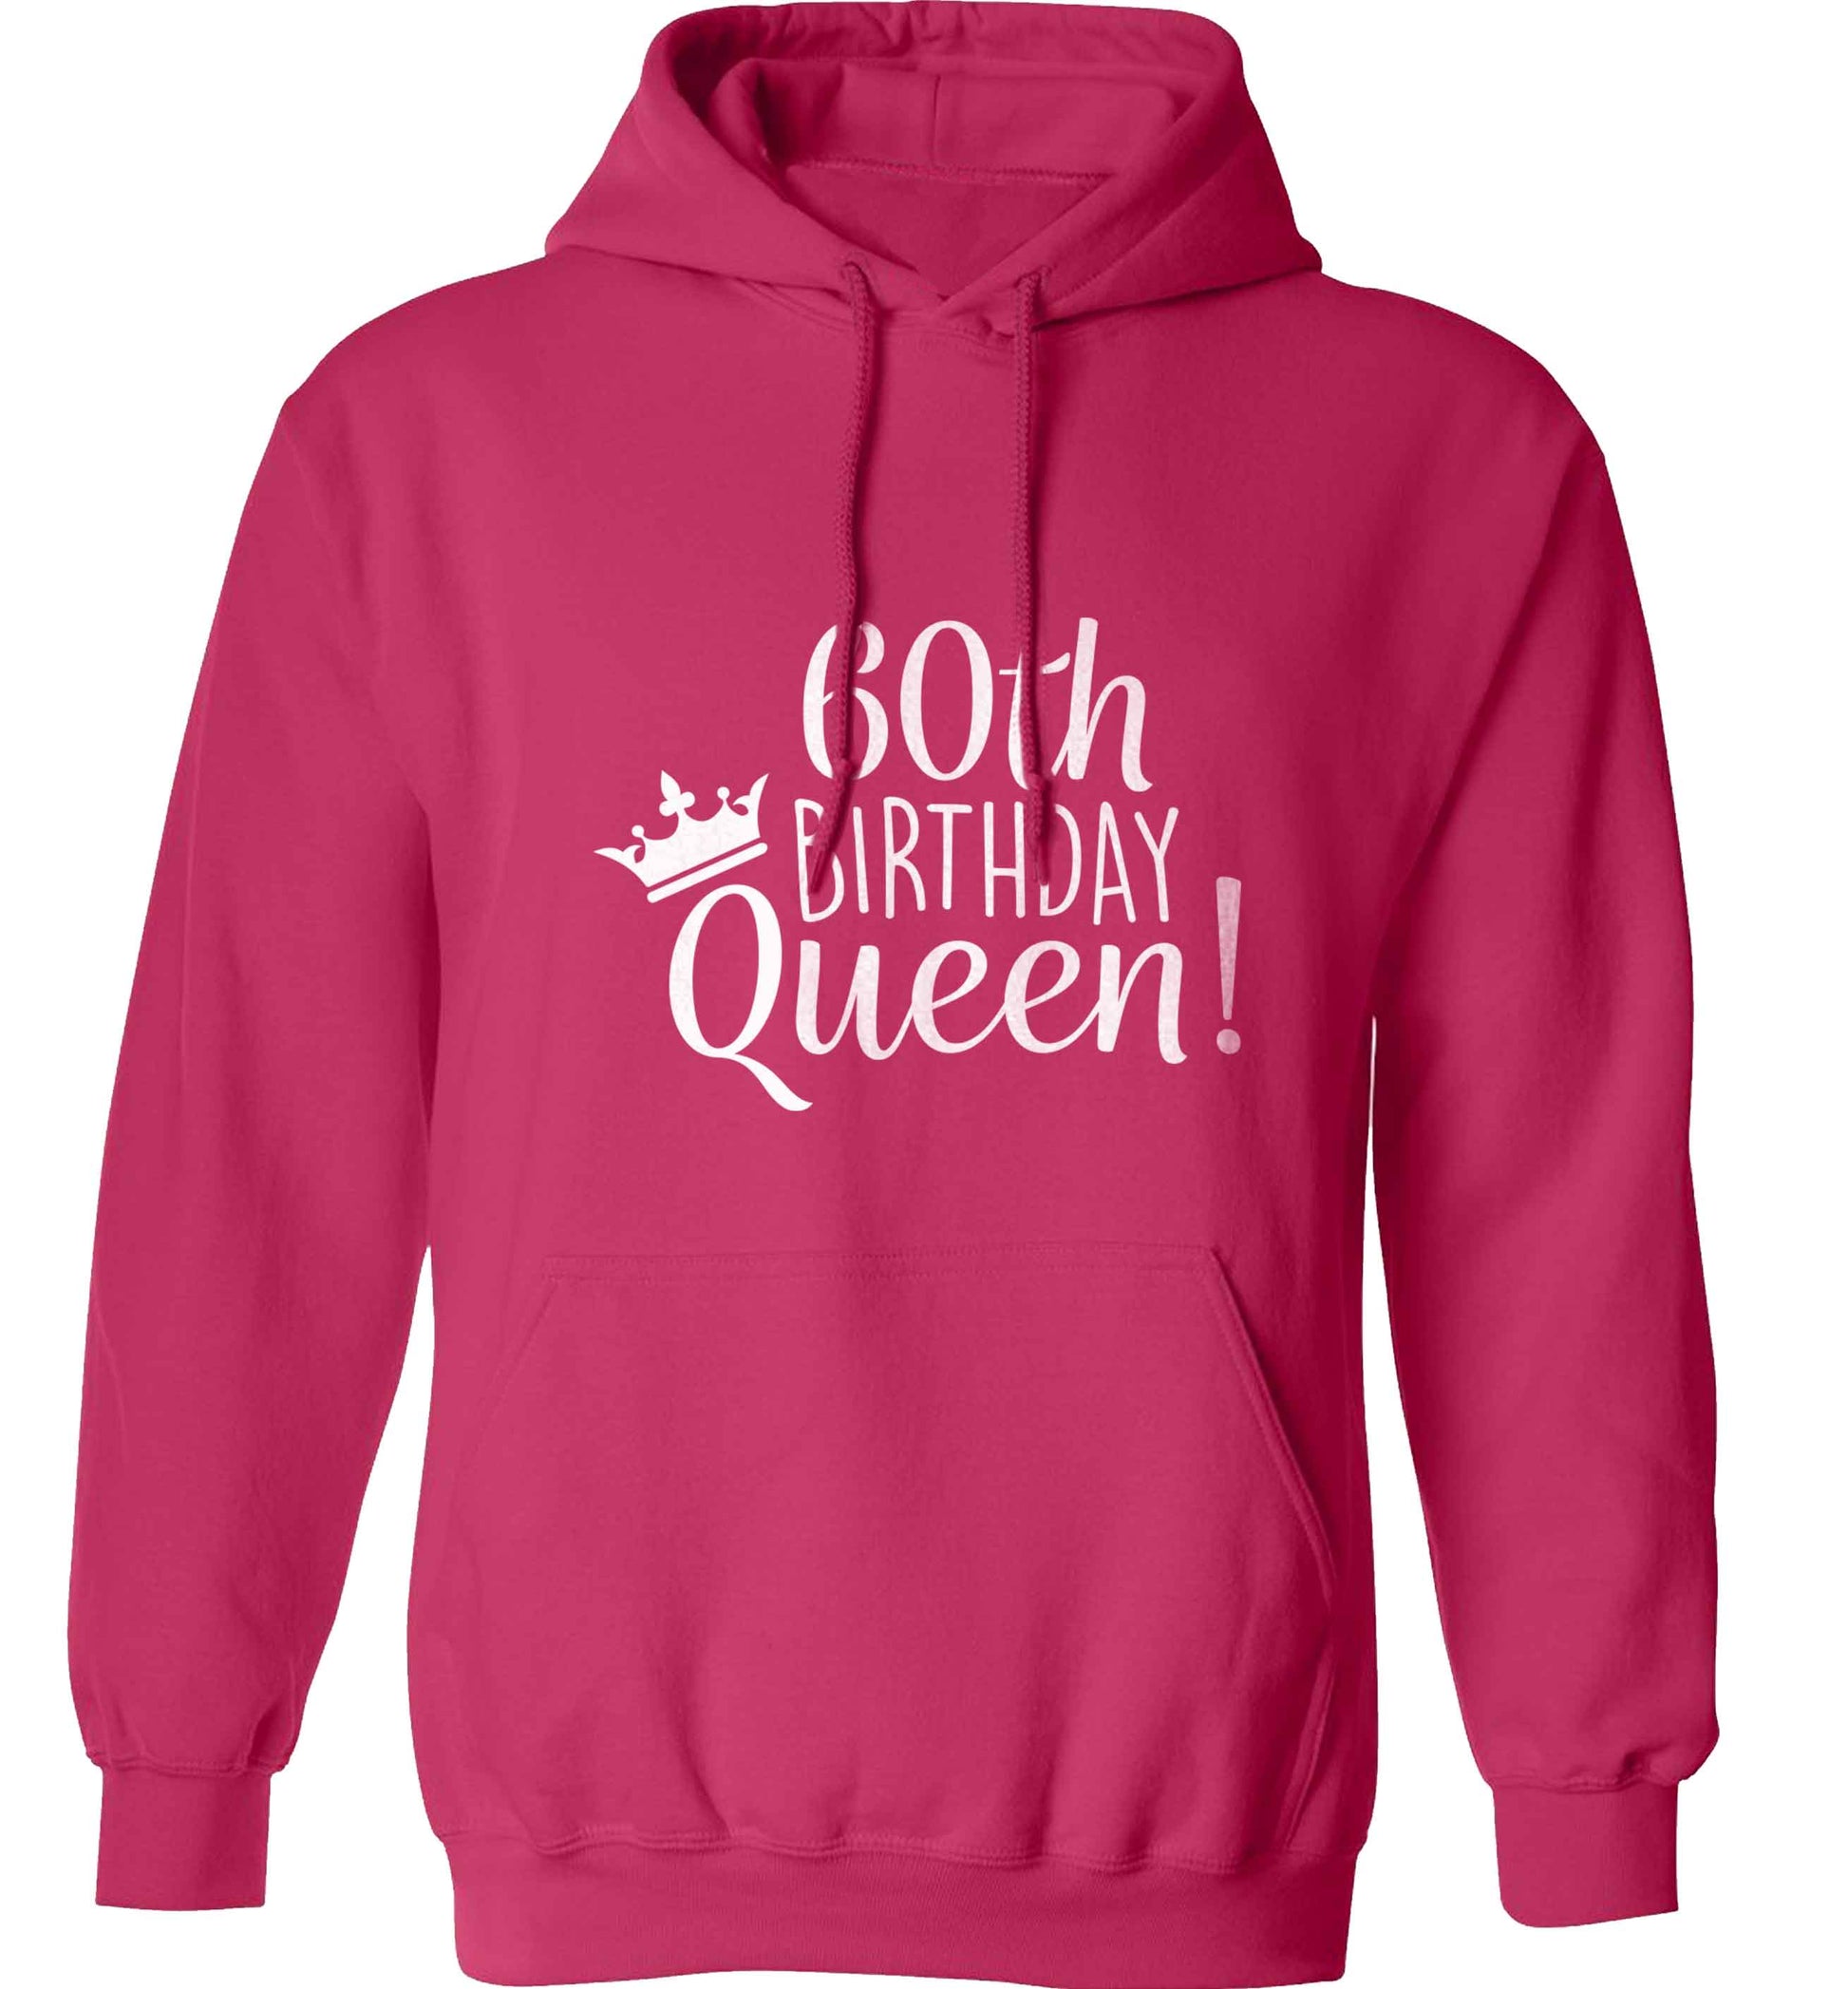 60th birthday Queen adults unisex pink hoodie 2XL